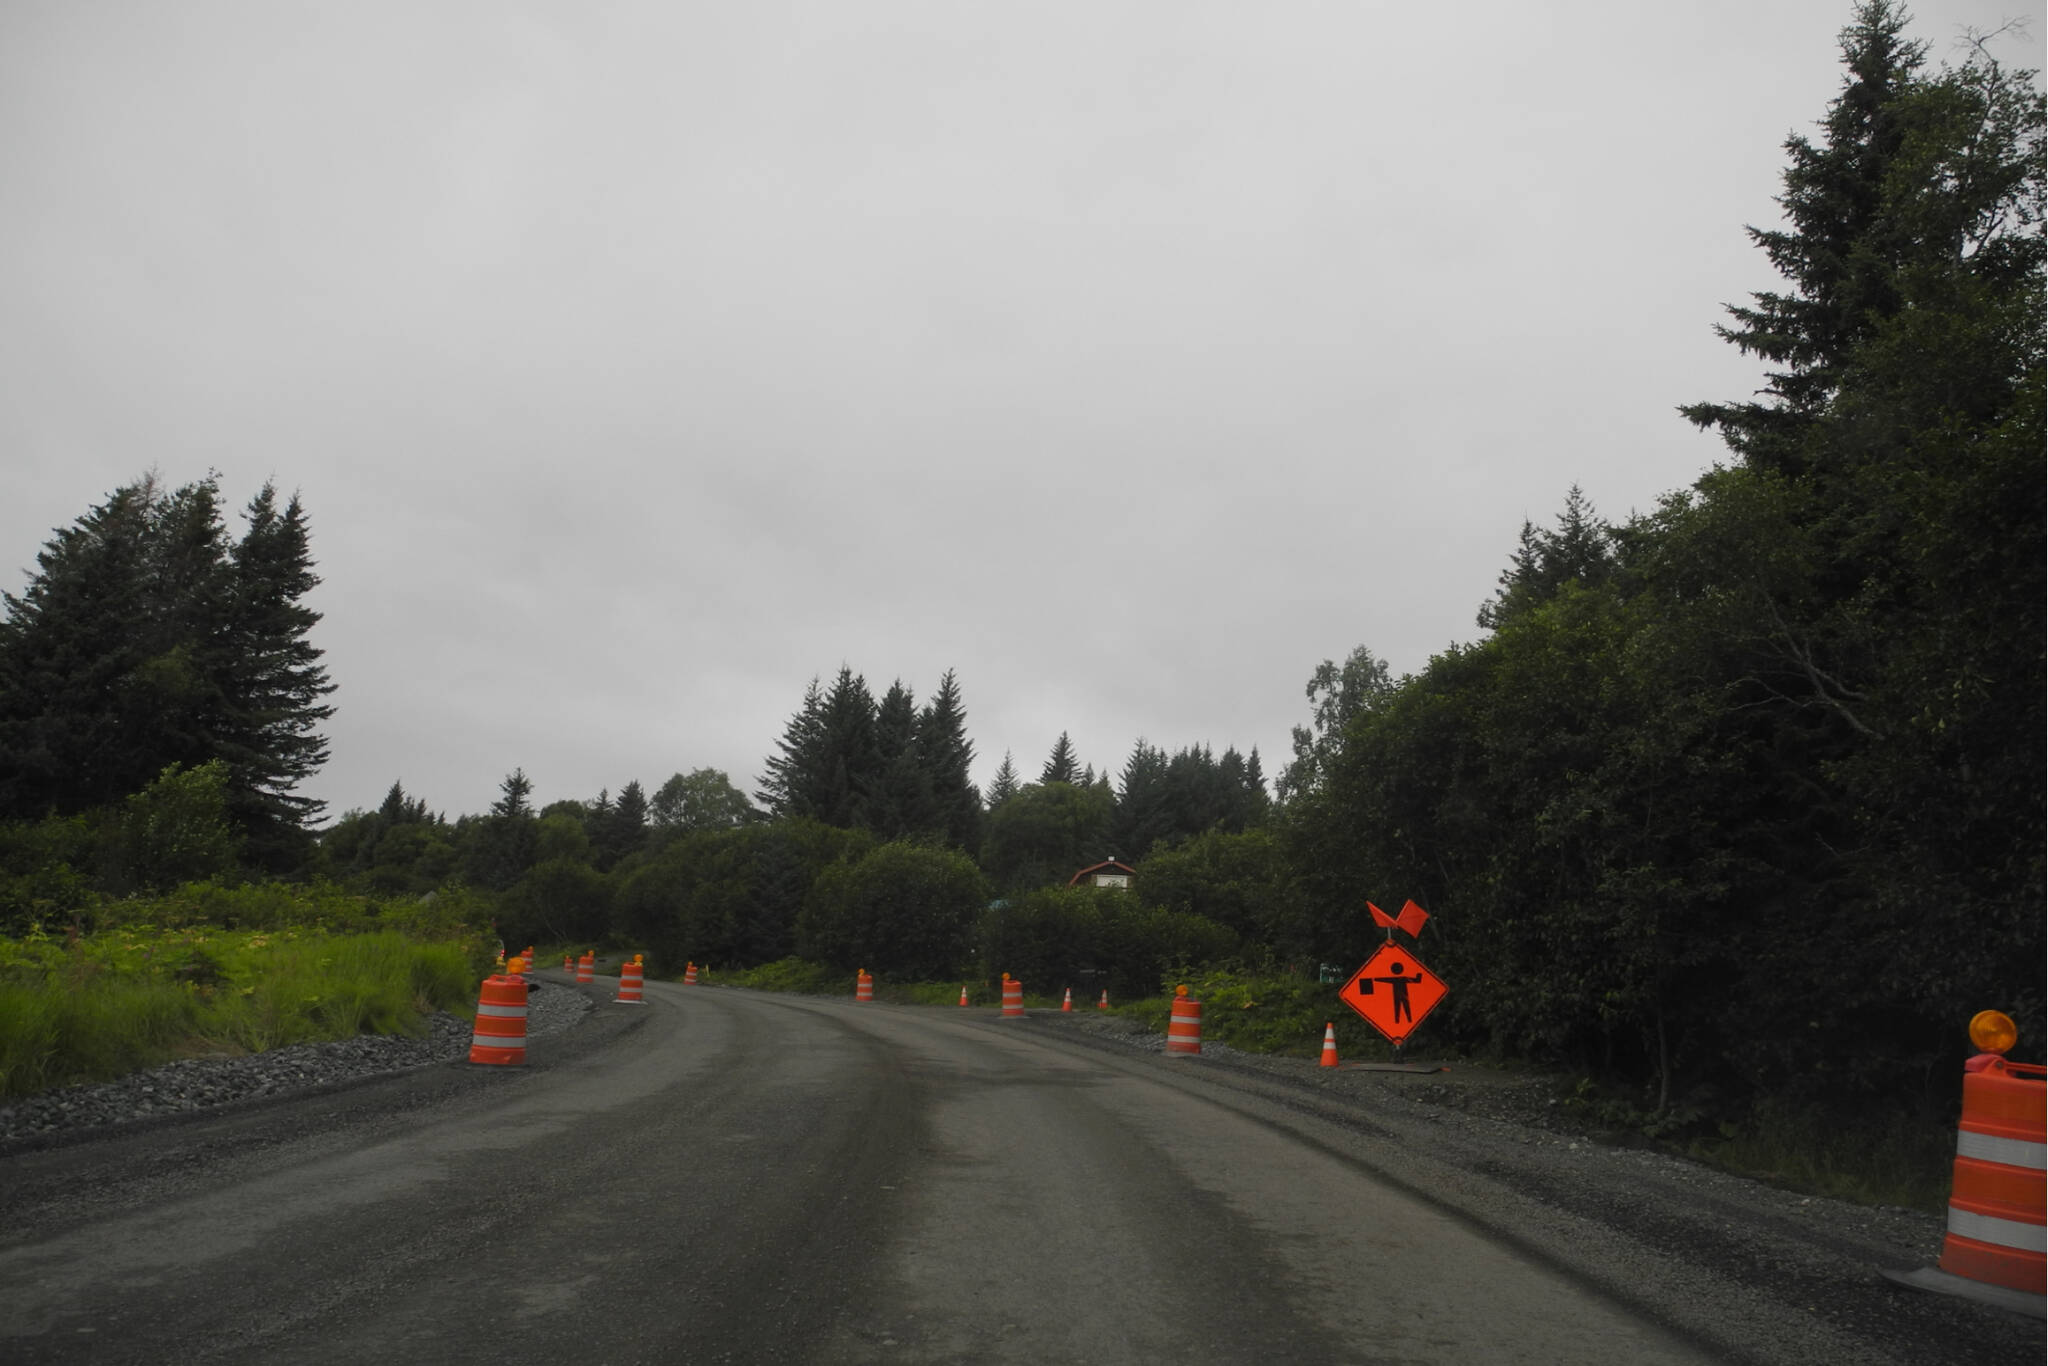 Work being done on East Hill Road on Monday, July 25, 2022, in Homer, Alaska. (Photo by Charlie Menke/Homer News)